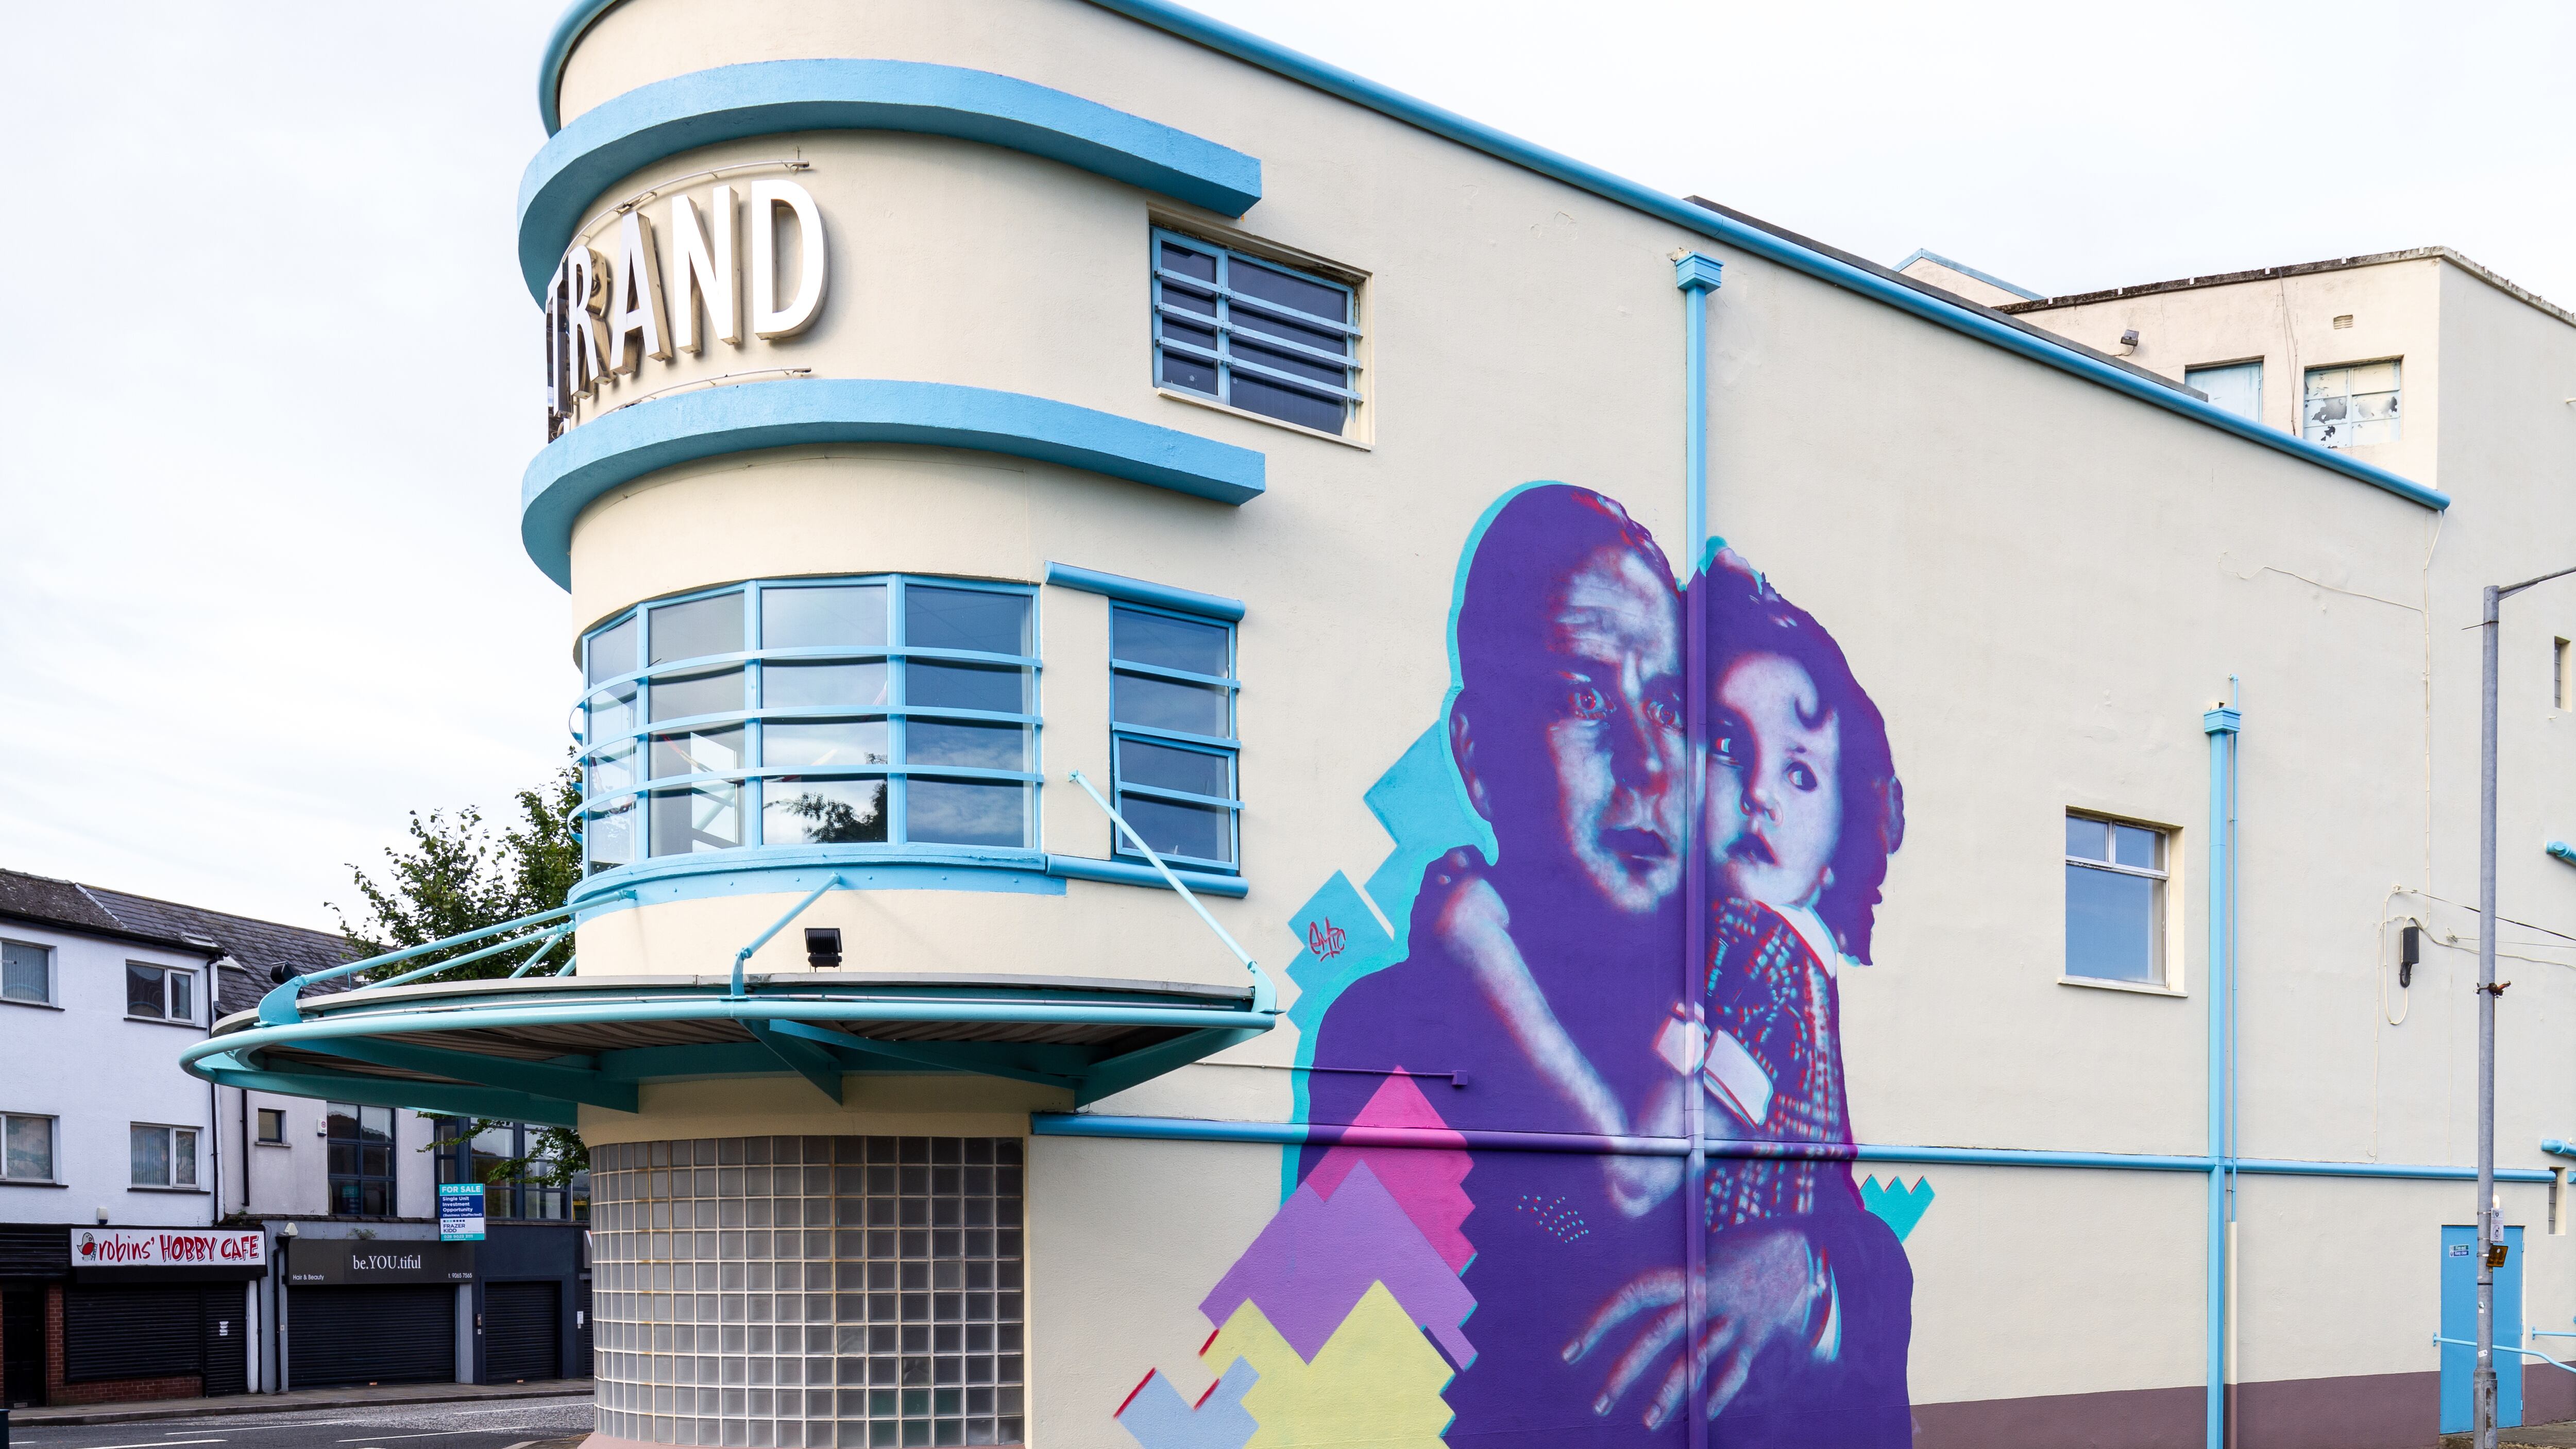 The historic Strand Cinema in east Belfast is set to reopen next year following a major restoration